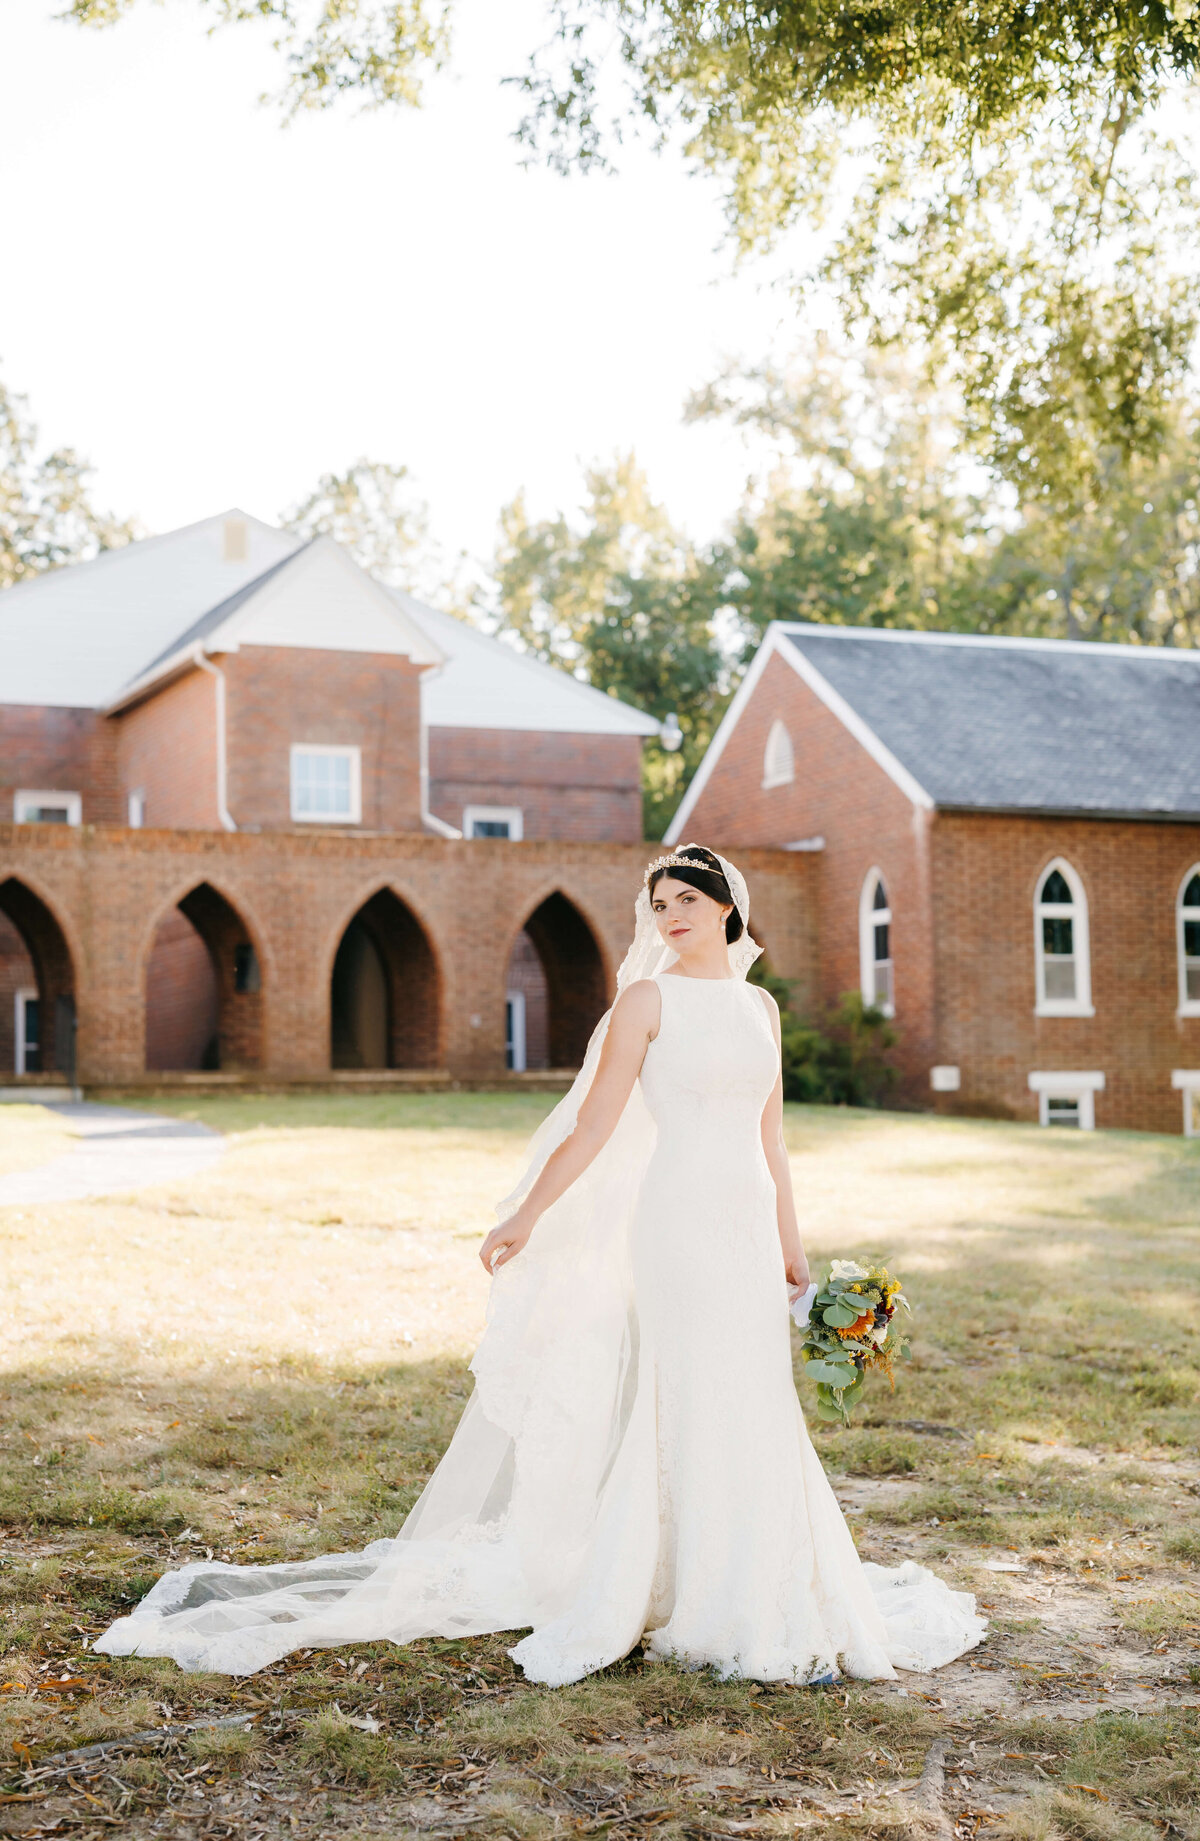 brick wedding chapel stands behind bride in a 1920s style wedding dress with modern touches as she poses with her hand gently holding her cathedral length wedding veil to the side and her wedding bouquet with her other hand for elegant wedding photos